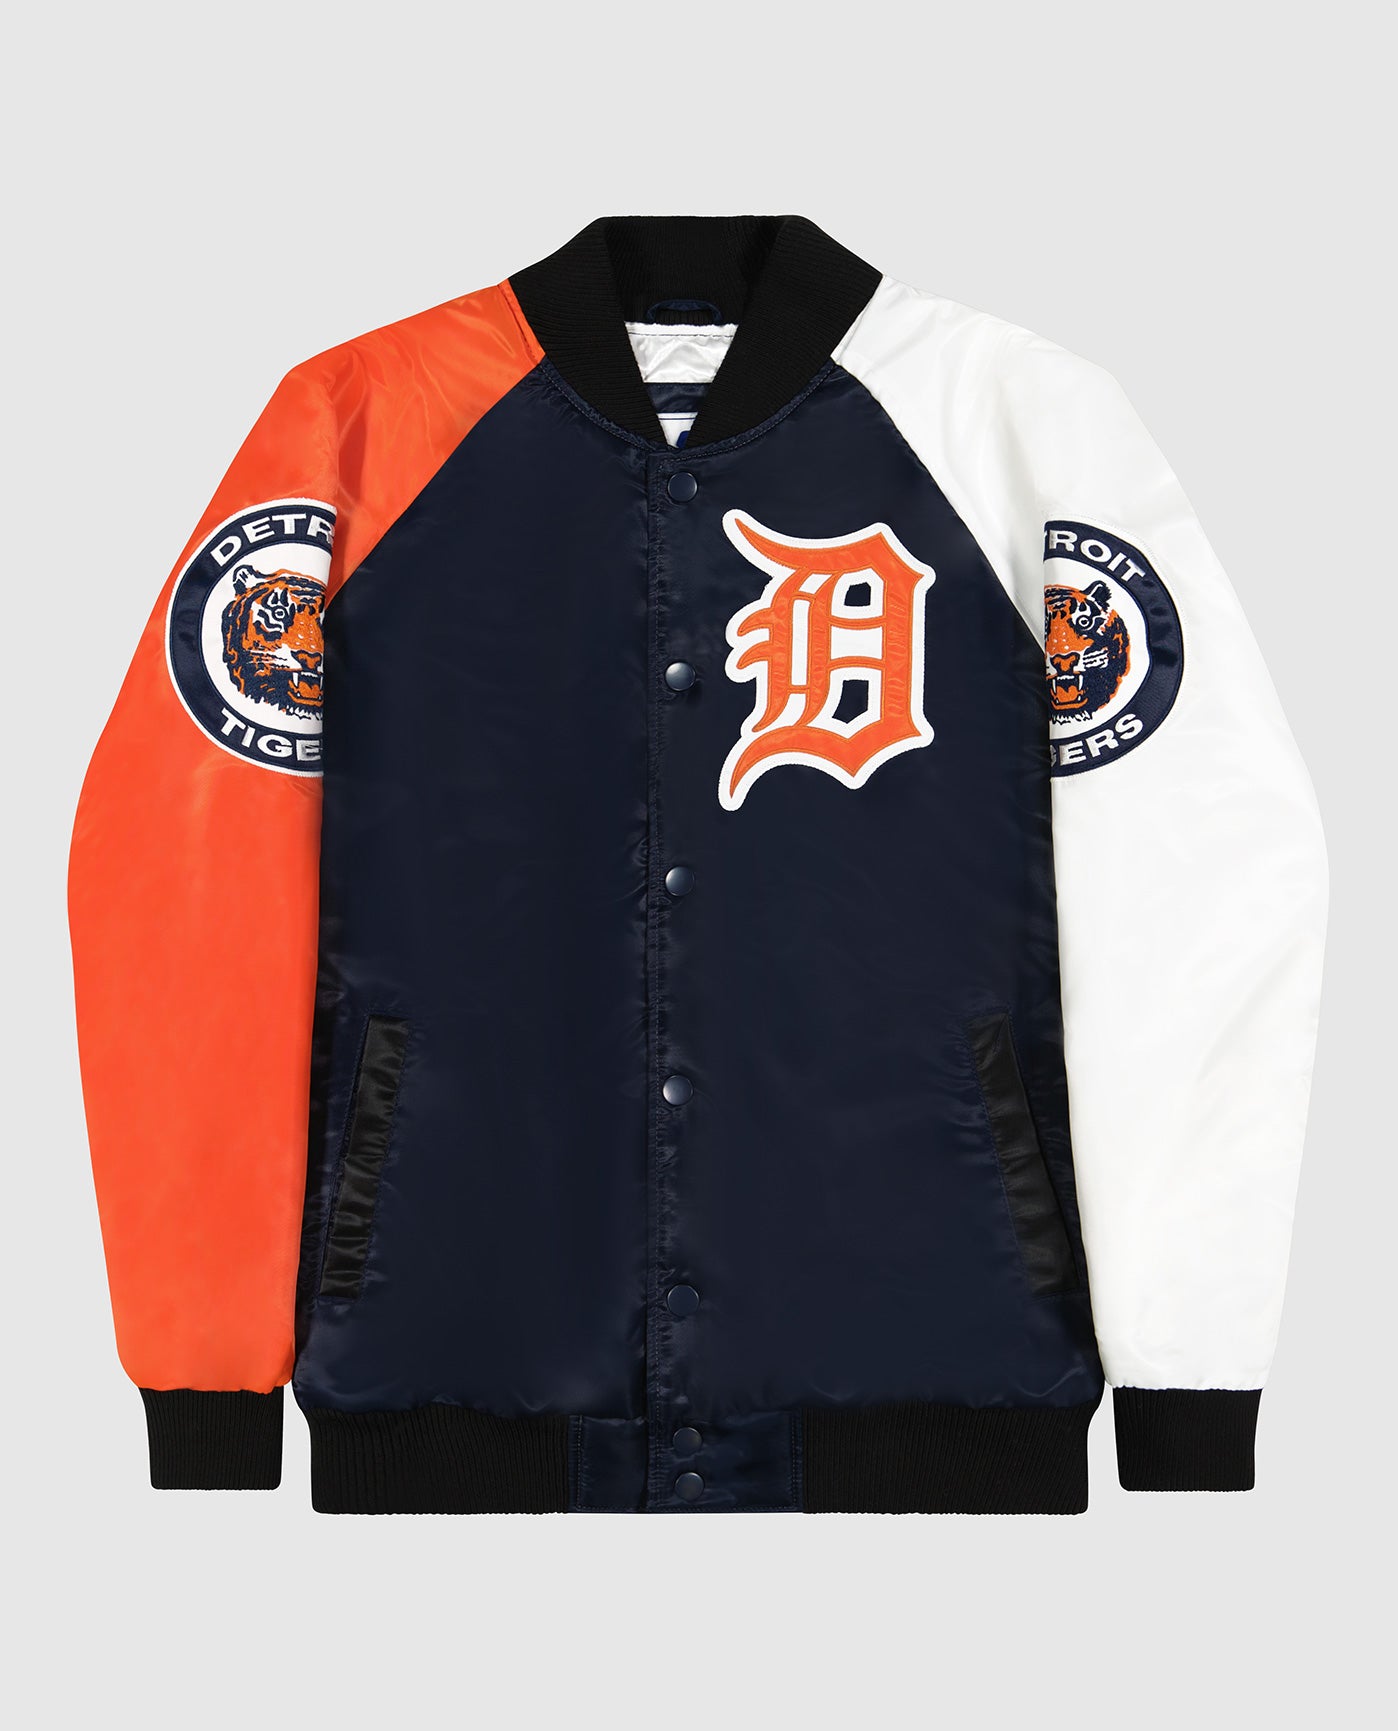 Detroit Tigers, Red Wings, Pistons & Lions Apparel - Free shipping